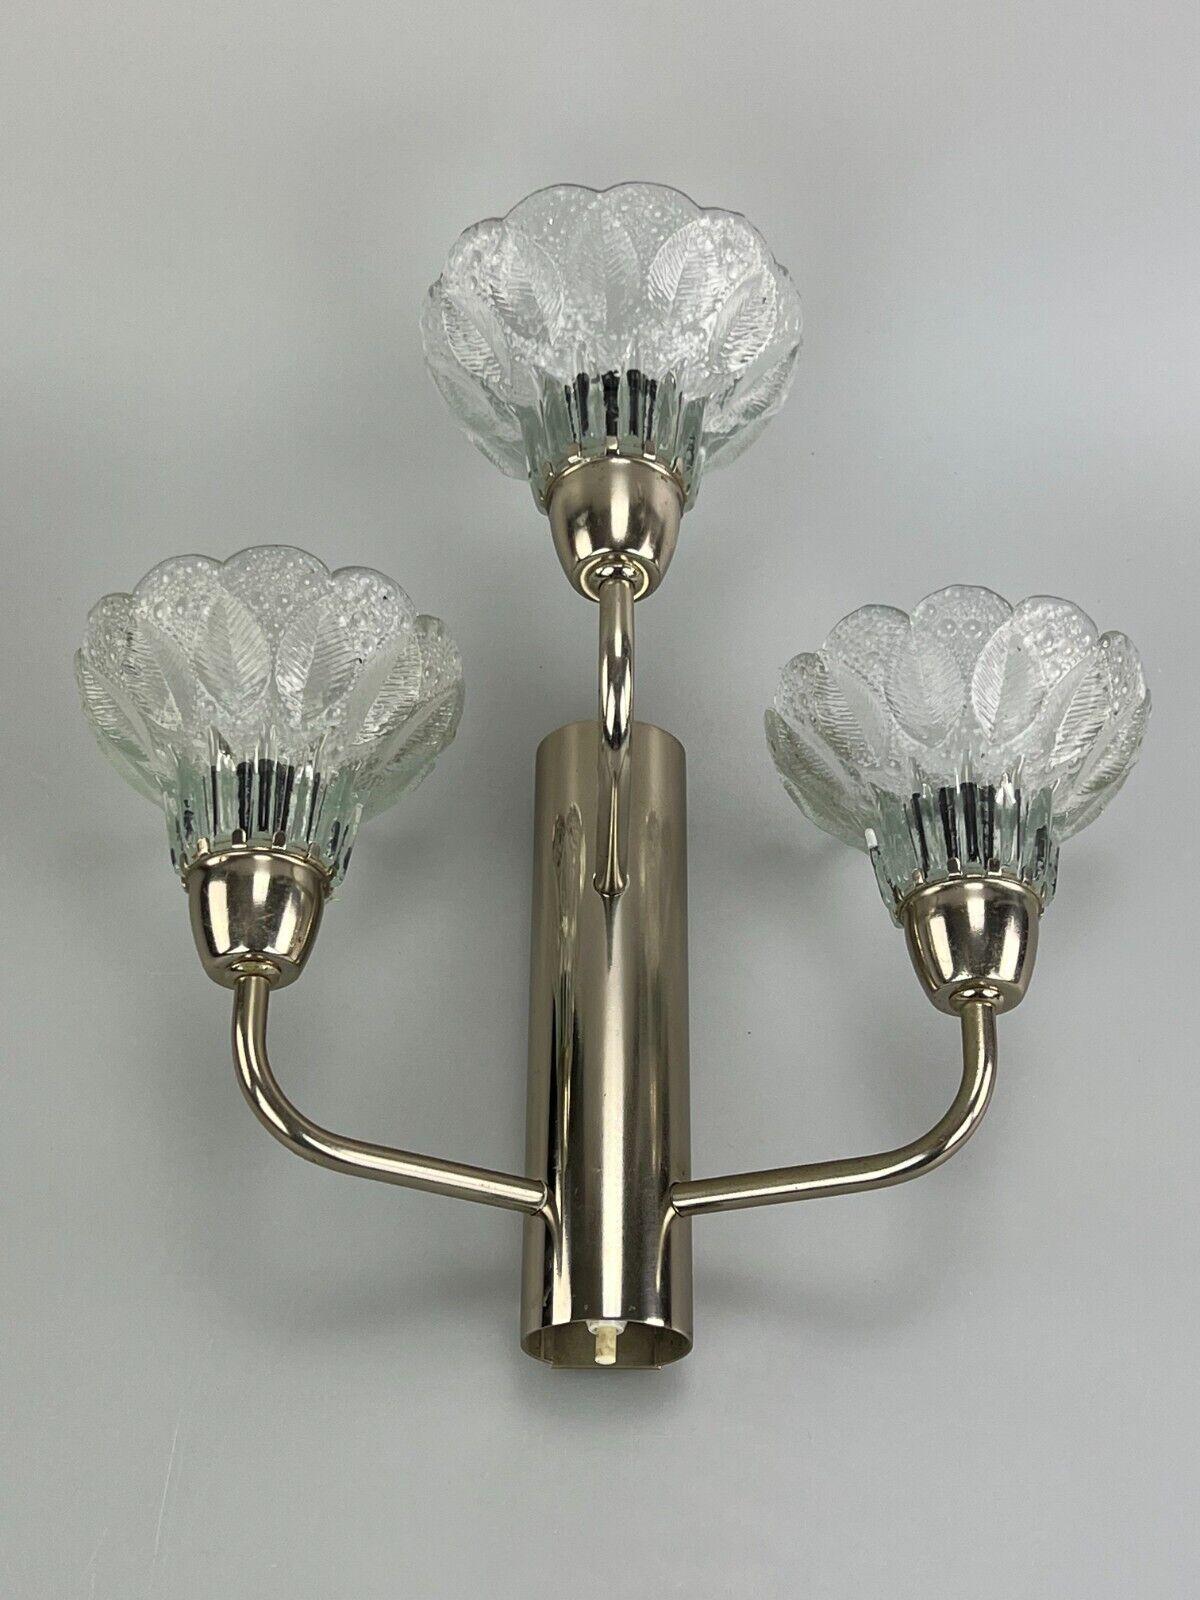 60s 70s Wall Lamp Lamp Light Space Age Mid Century Design In Good Condition For Sale In Neuenkirchen, NI